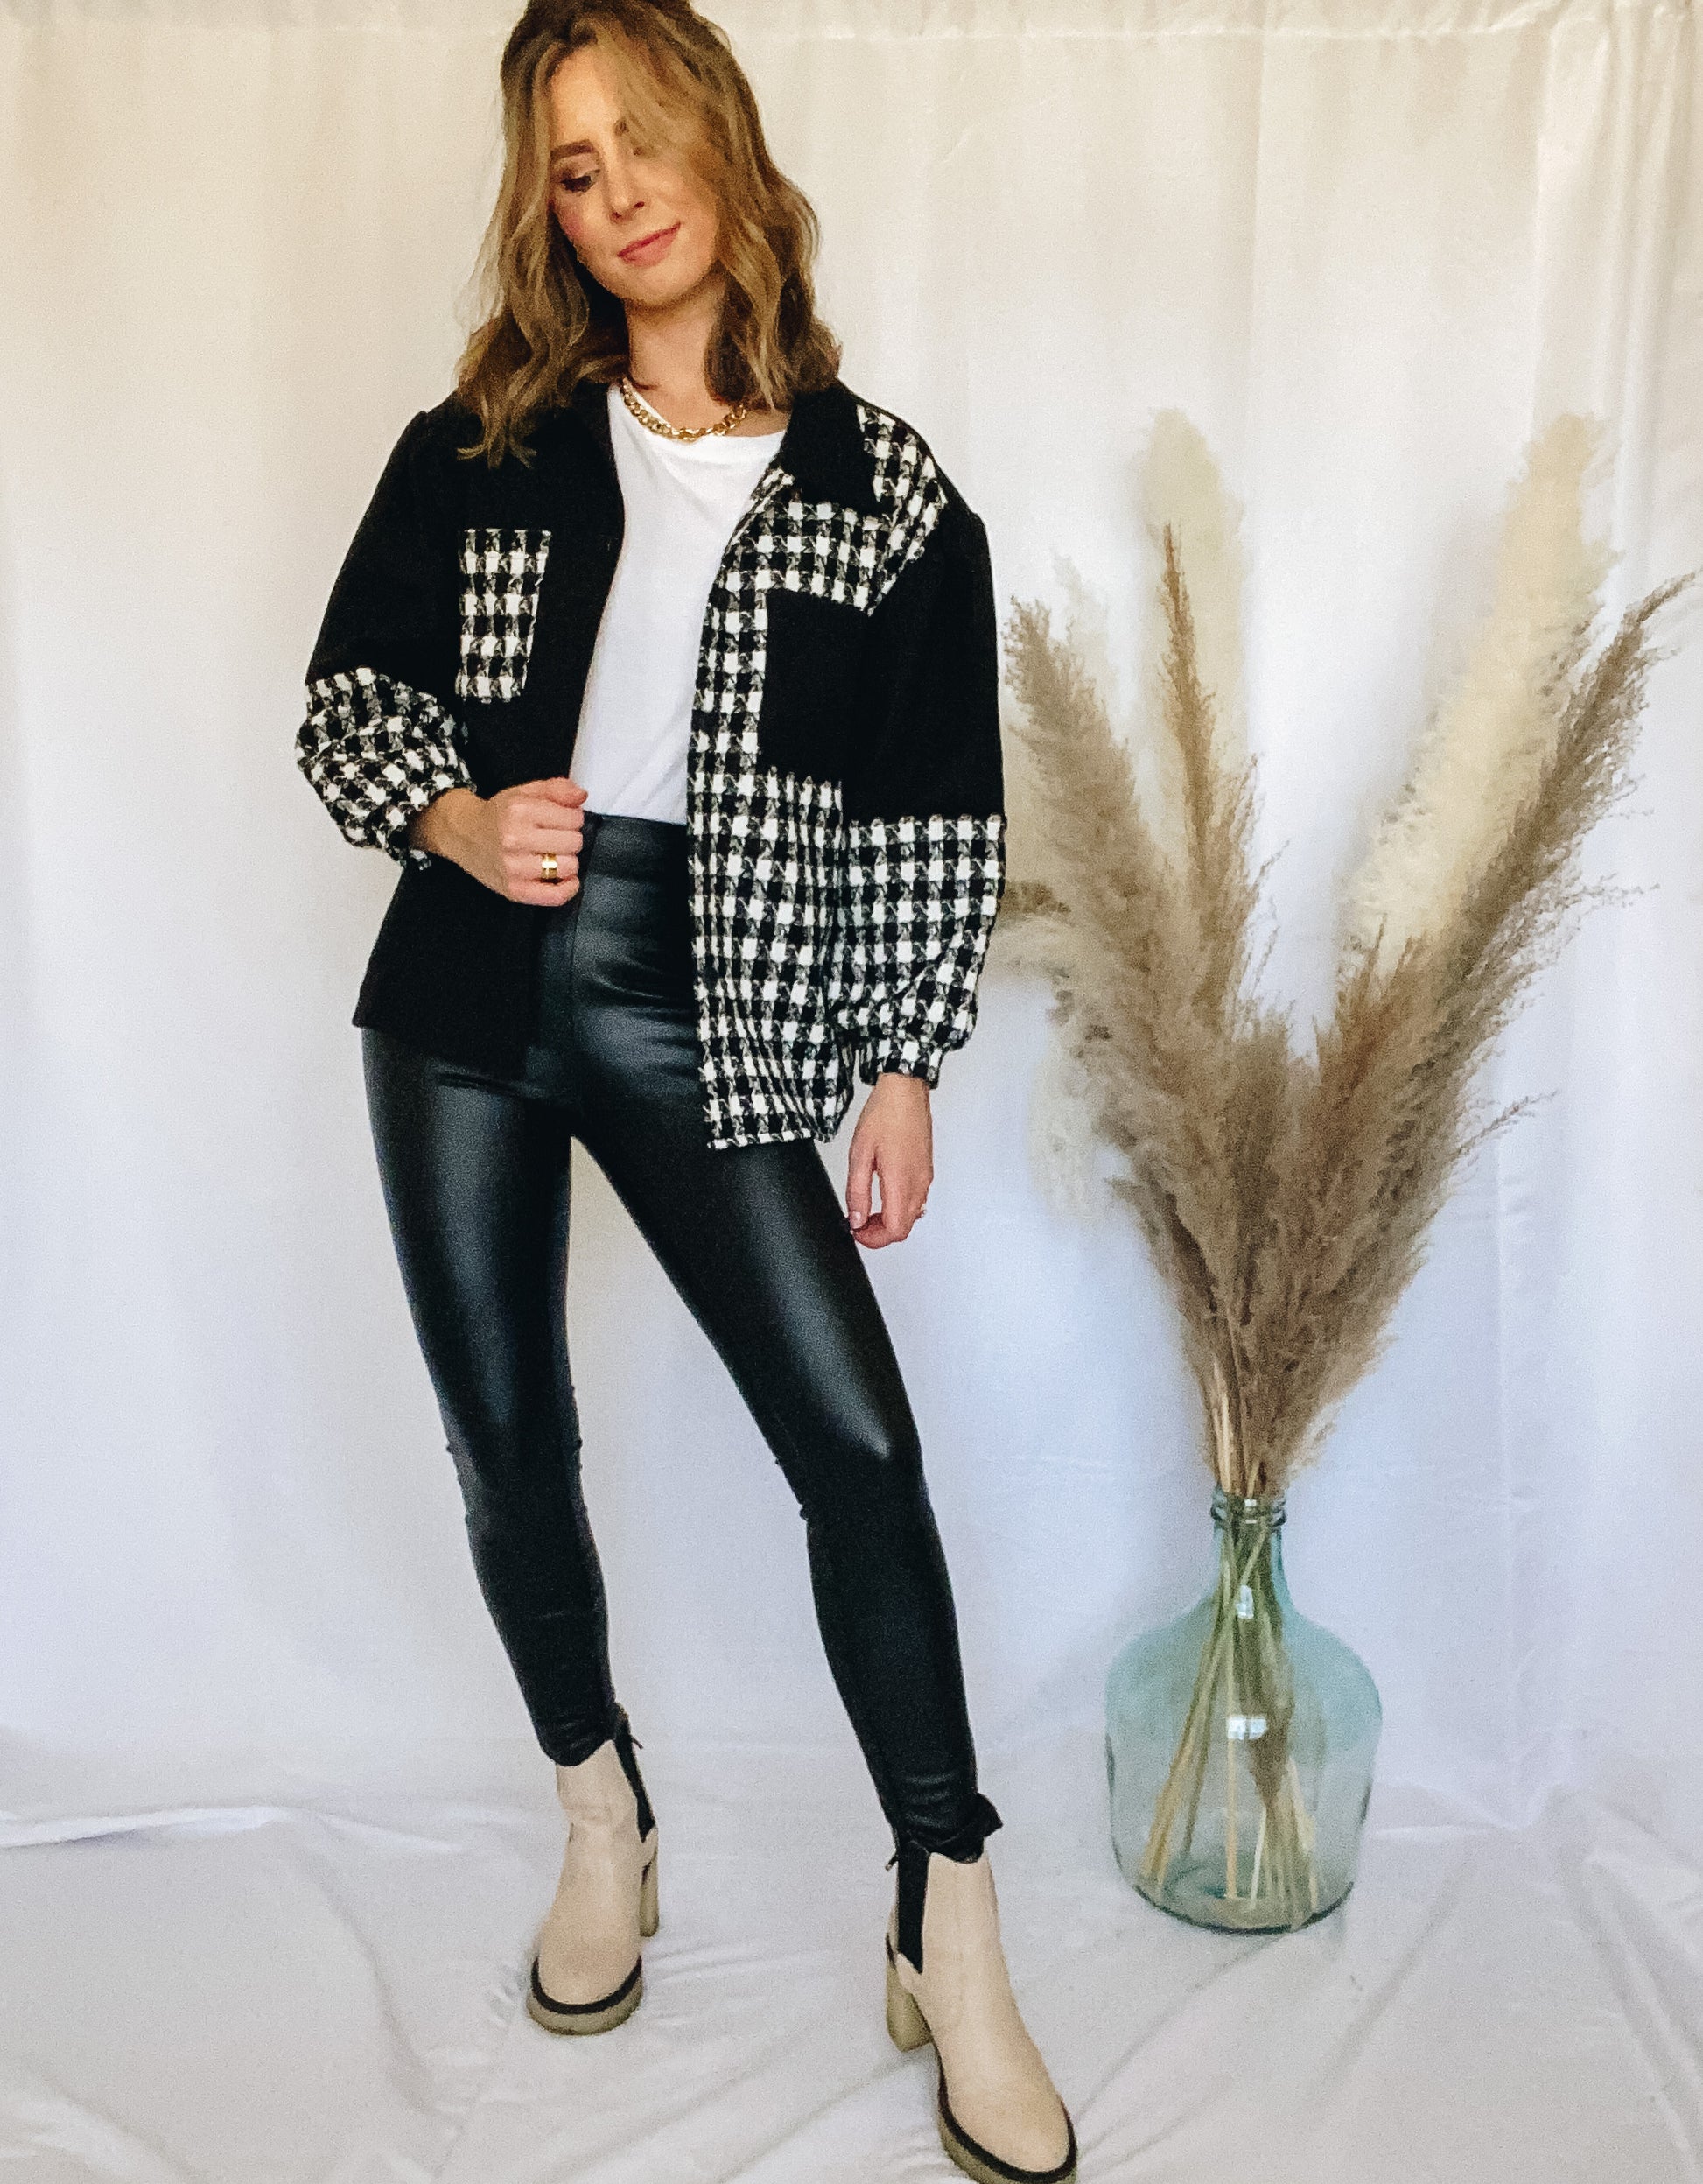 Two-tone colorblock houndstooth and black jacket with breast pockets and puff sleeve details with faux leather leggings and tan chunky heel boots